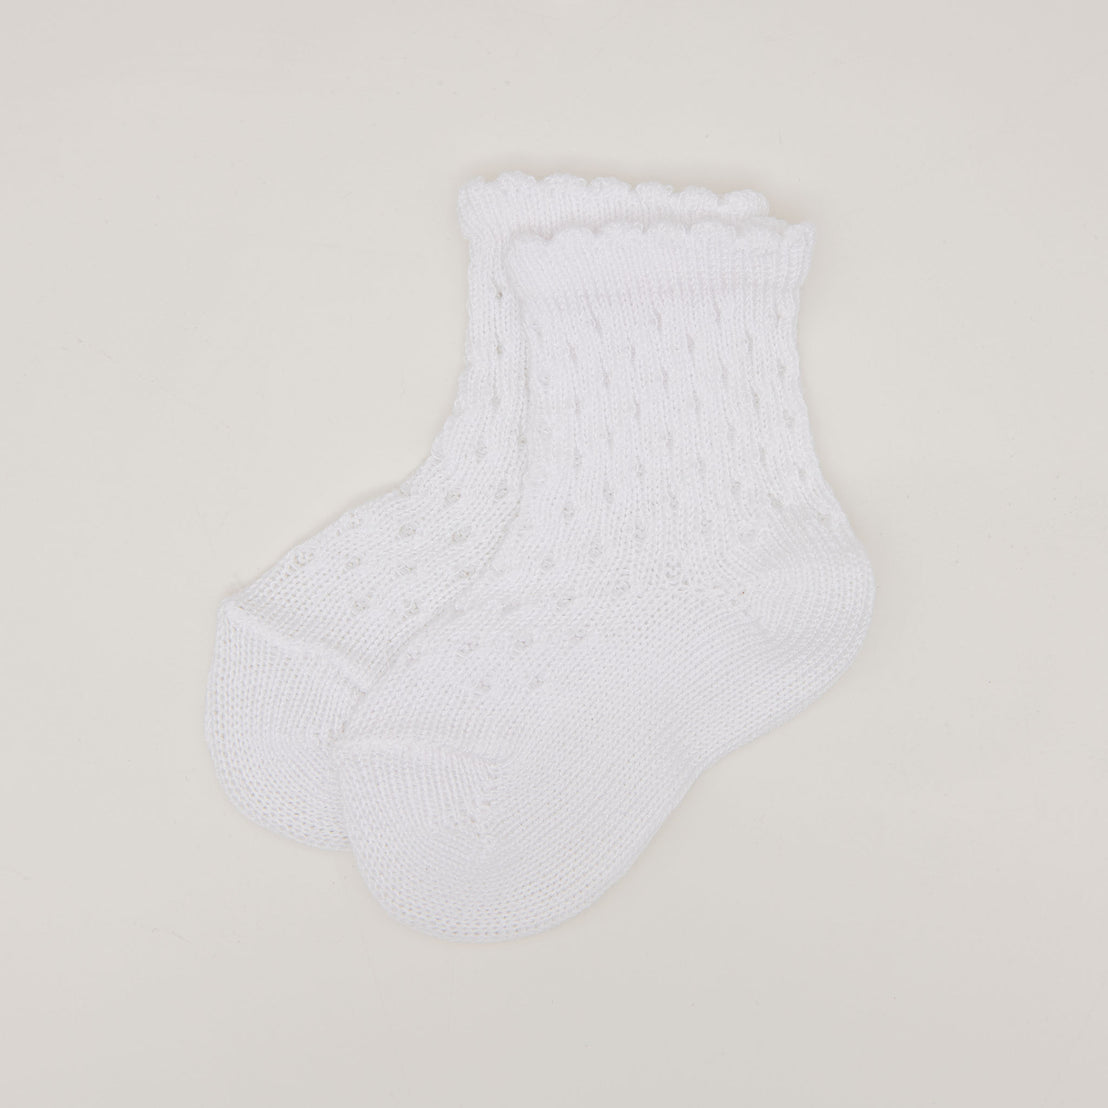 A pair of white Scallop Edge Crochet Socks with a delicate knit pattern and ribbed cuffs, displayed on a plain light background.